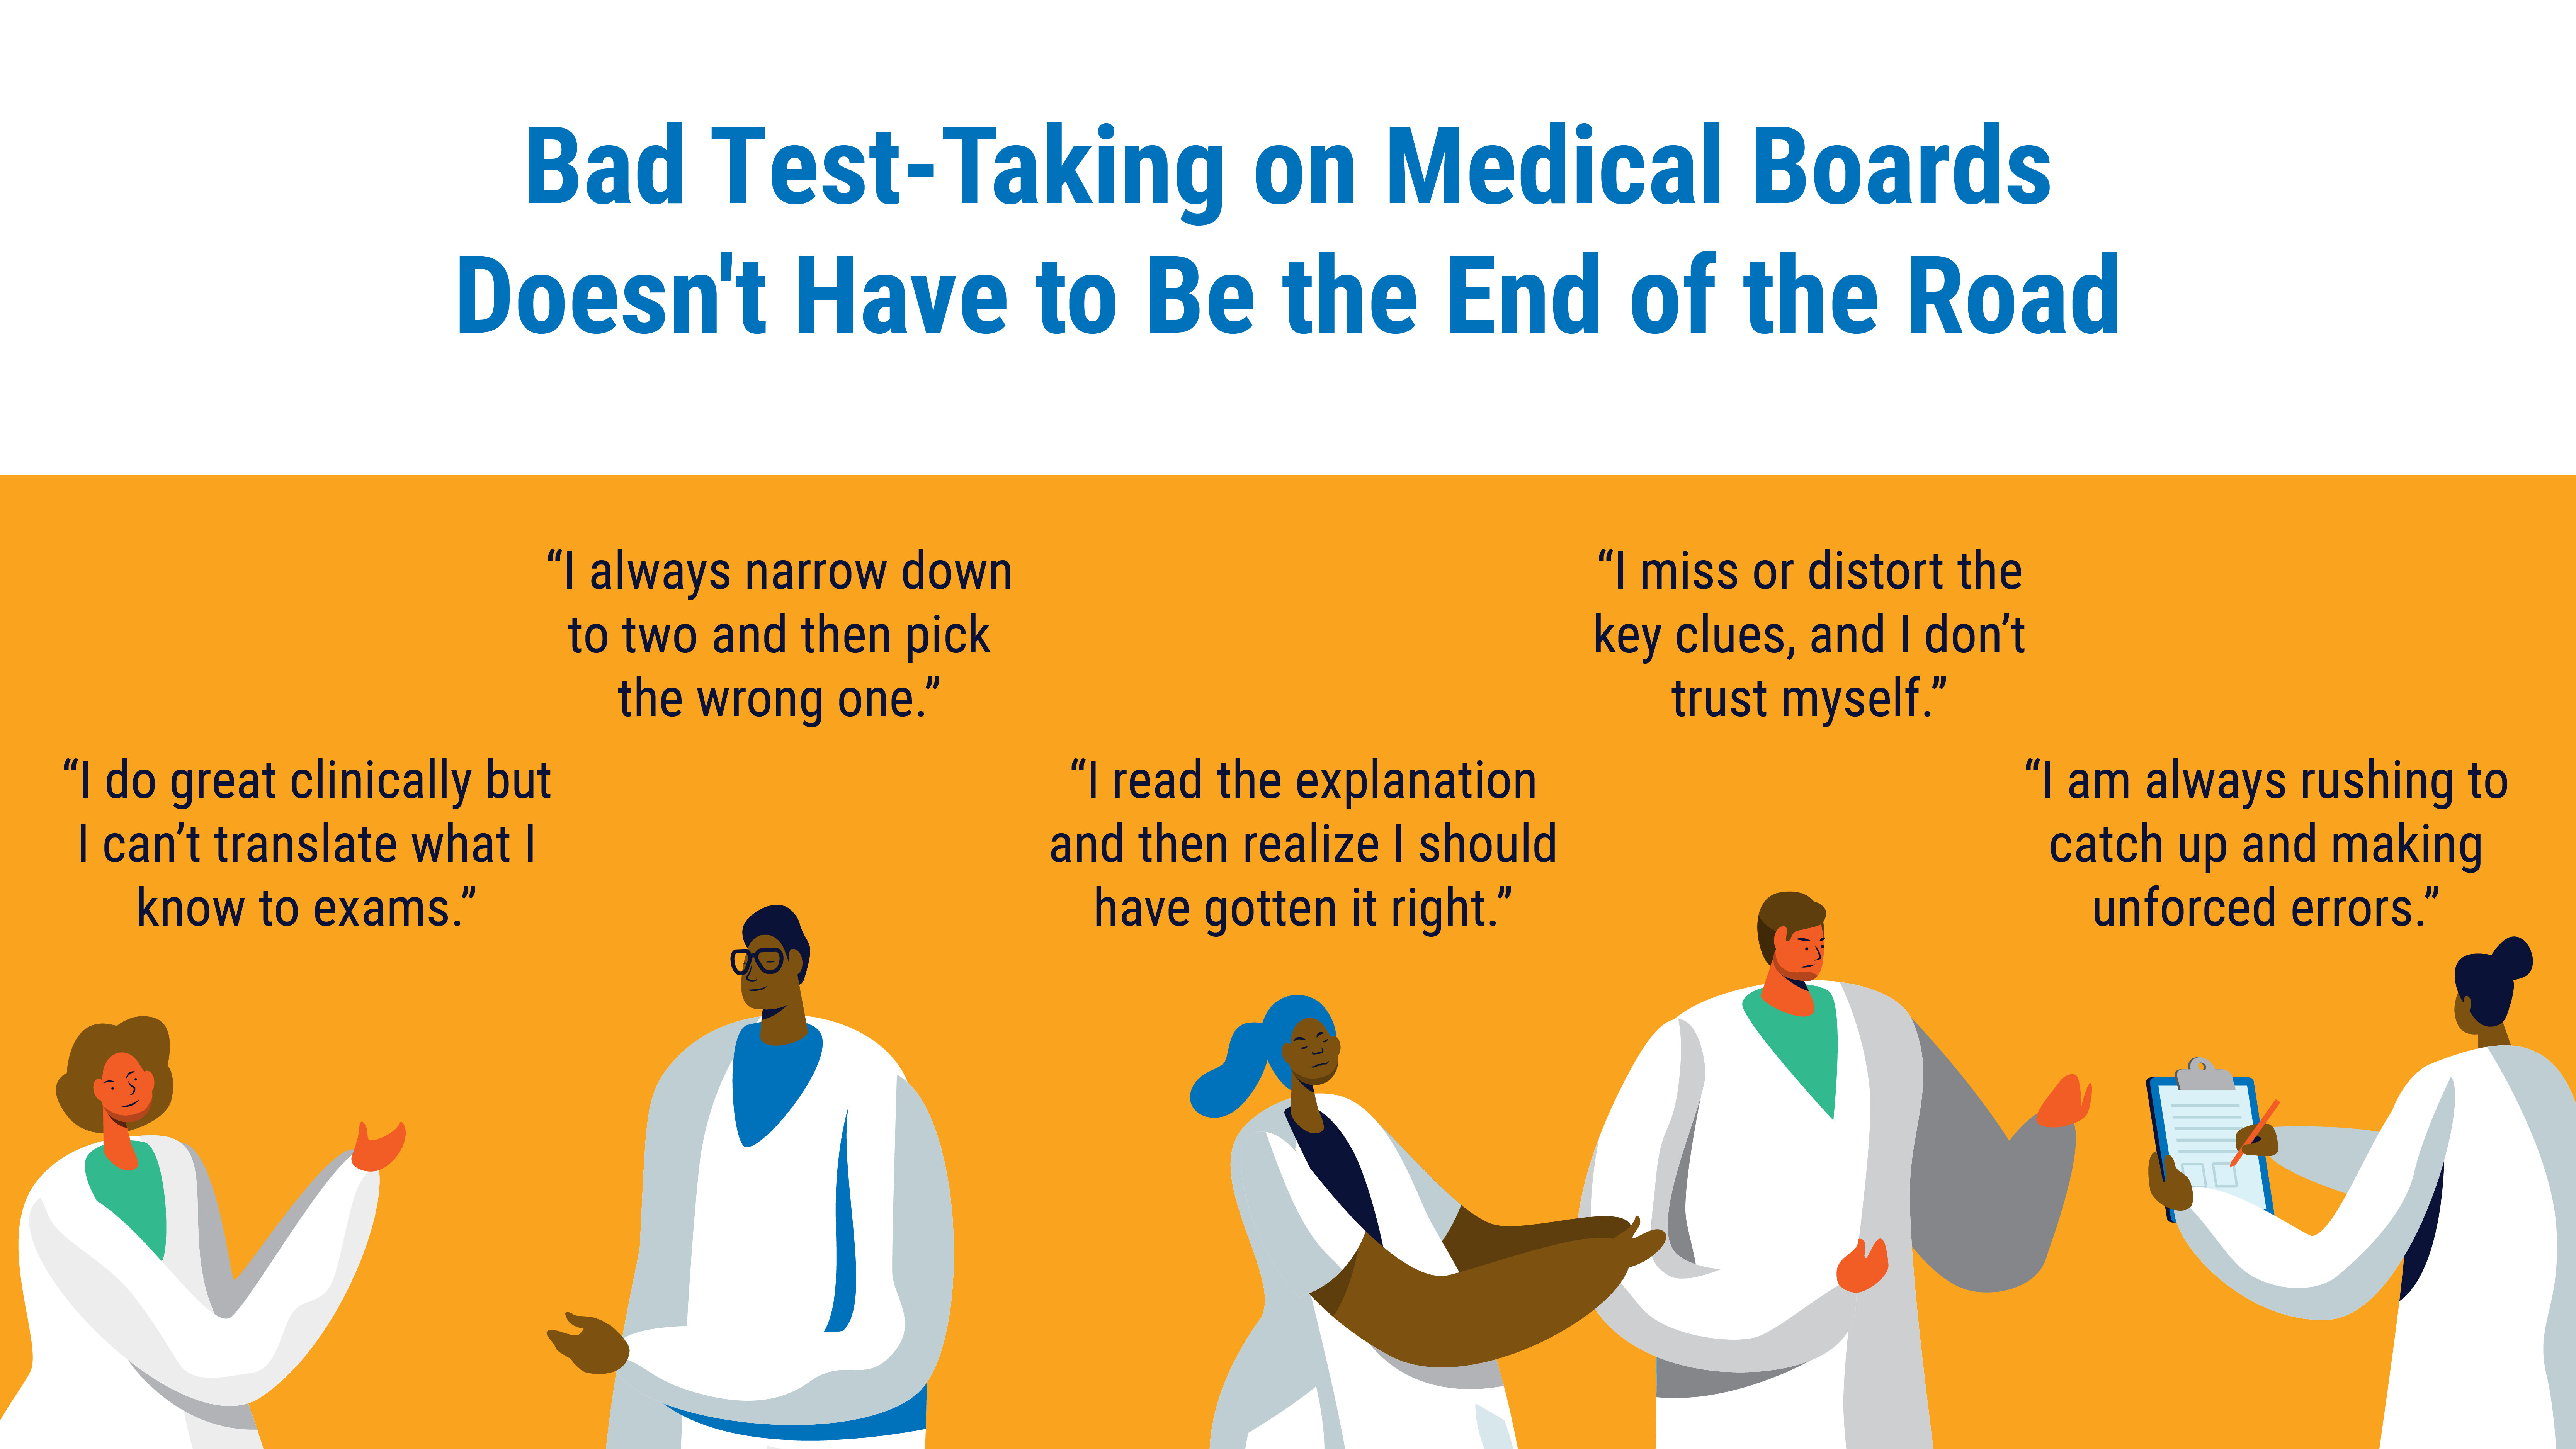 Featured image for “Bad Test-Taking on Medical Boards Doesn’t Have to Be the End of the Road”